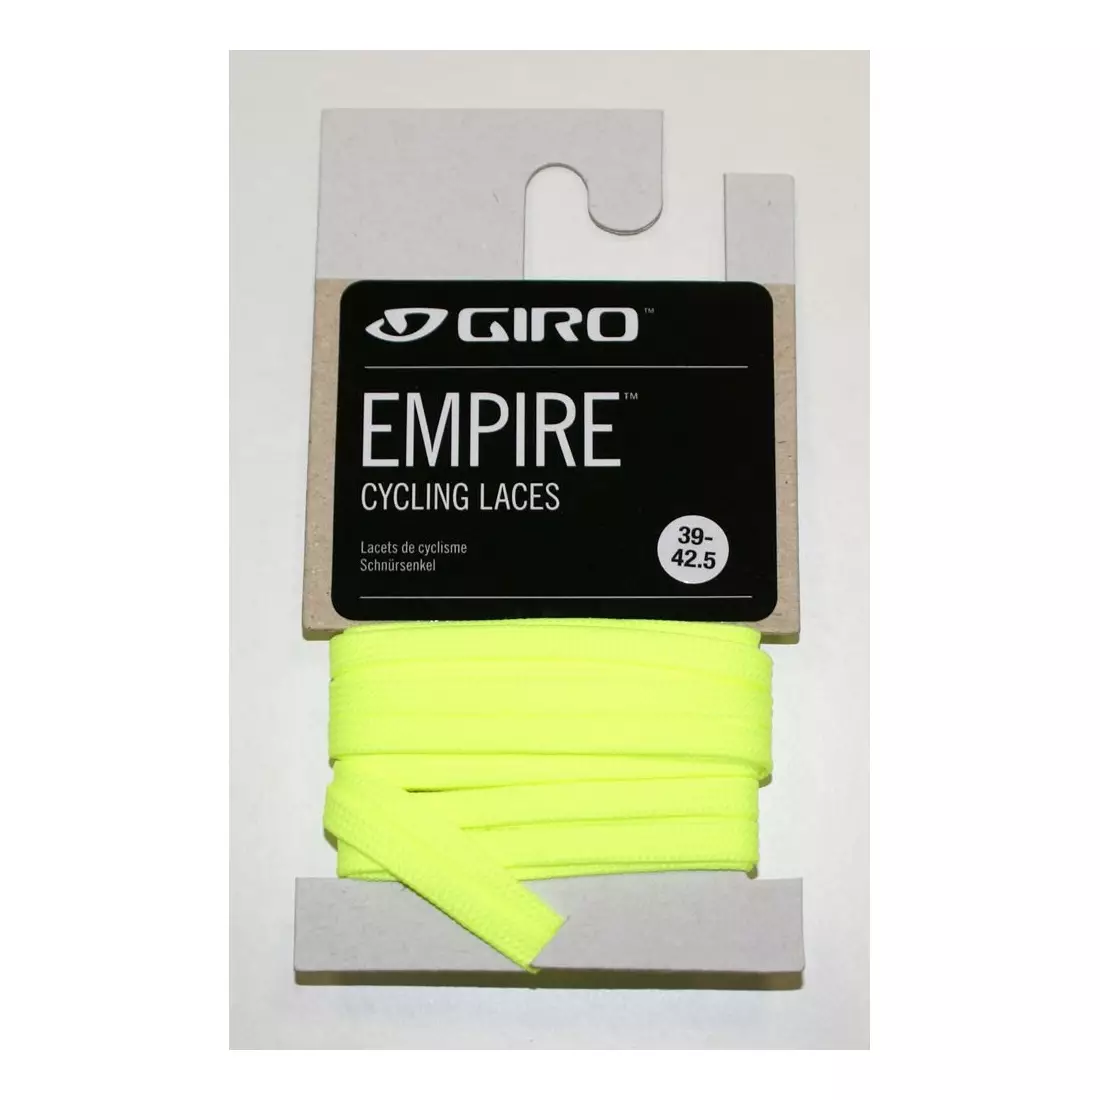 GIRO laces for cycling shoes EMPIRE LACES highlight yellow GR-7084149